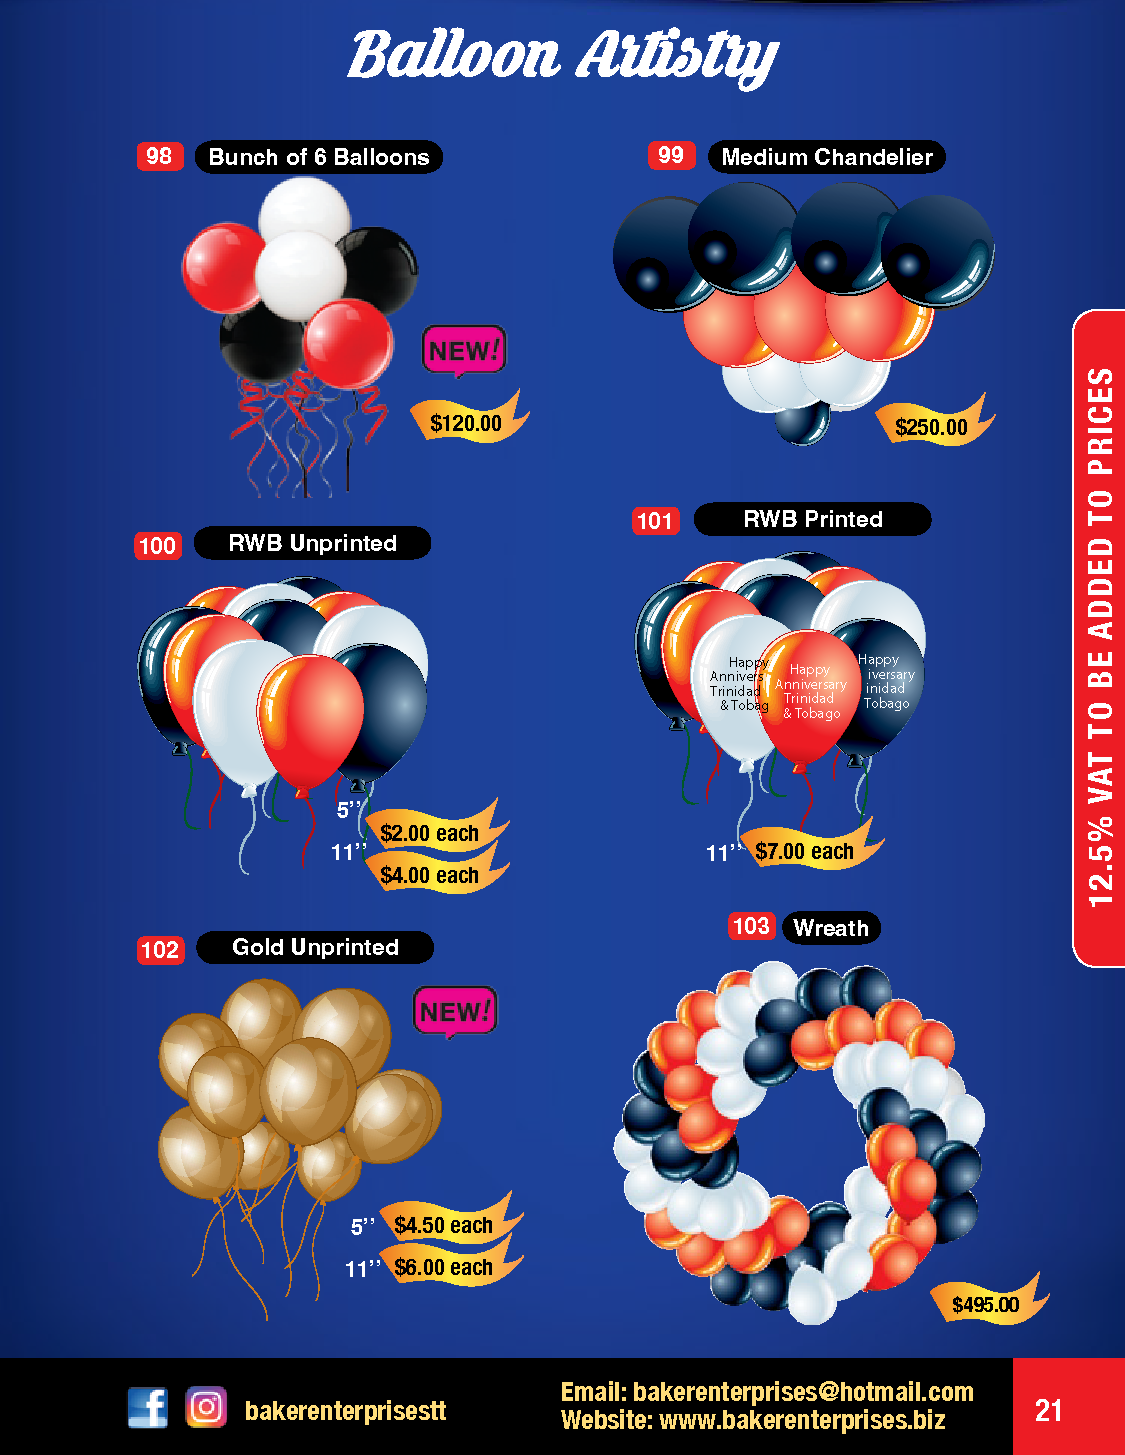 Untitled-1_balloon_artistry_a